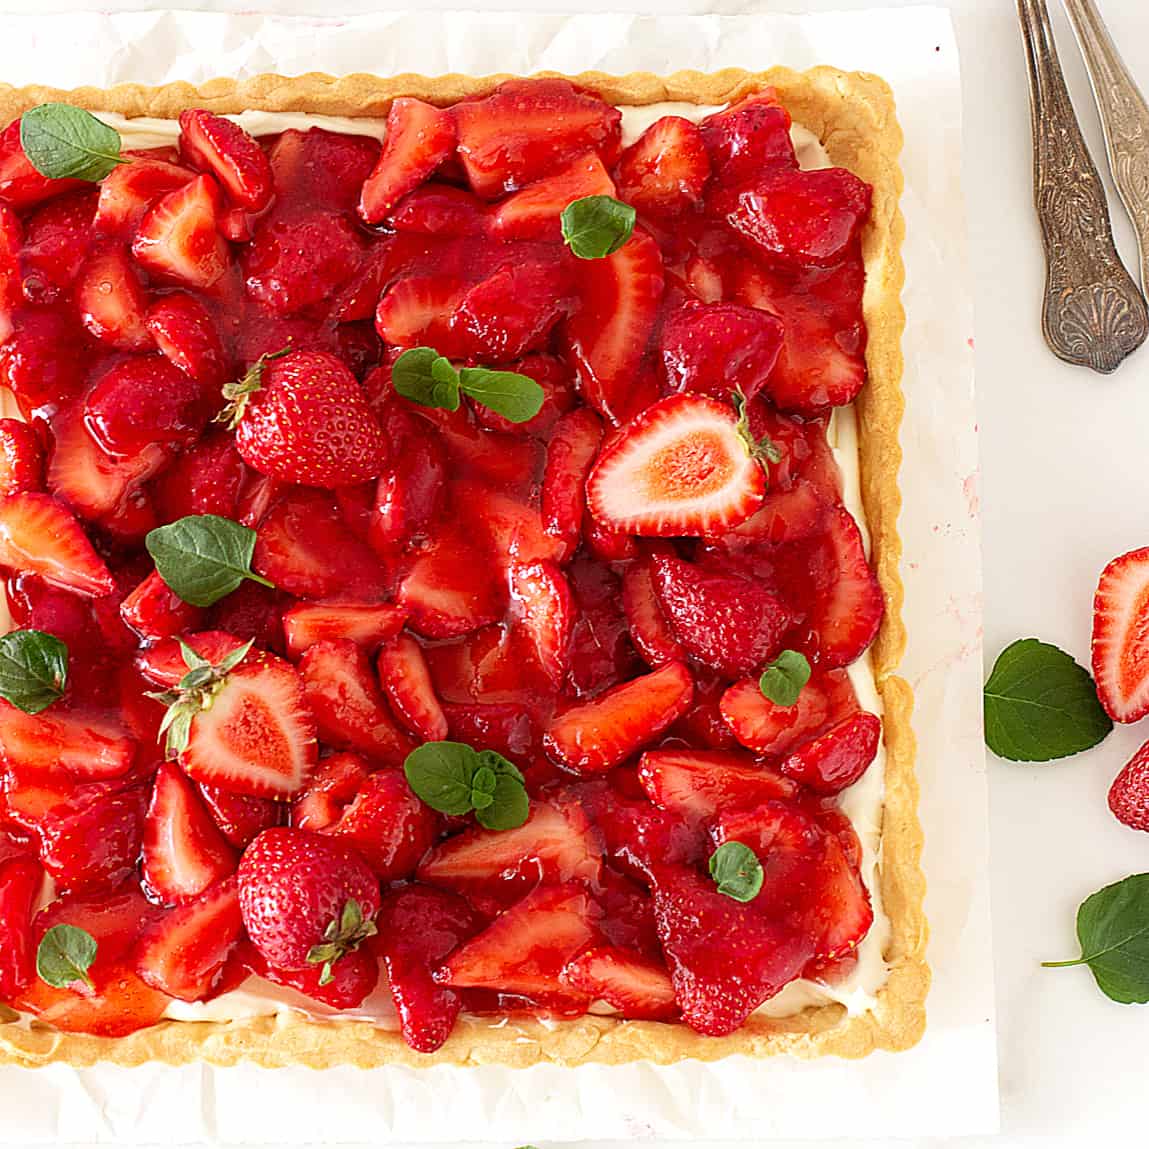 Partial view of strawberry tart on white surface, mint leaves and fork beside